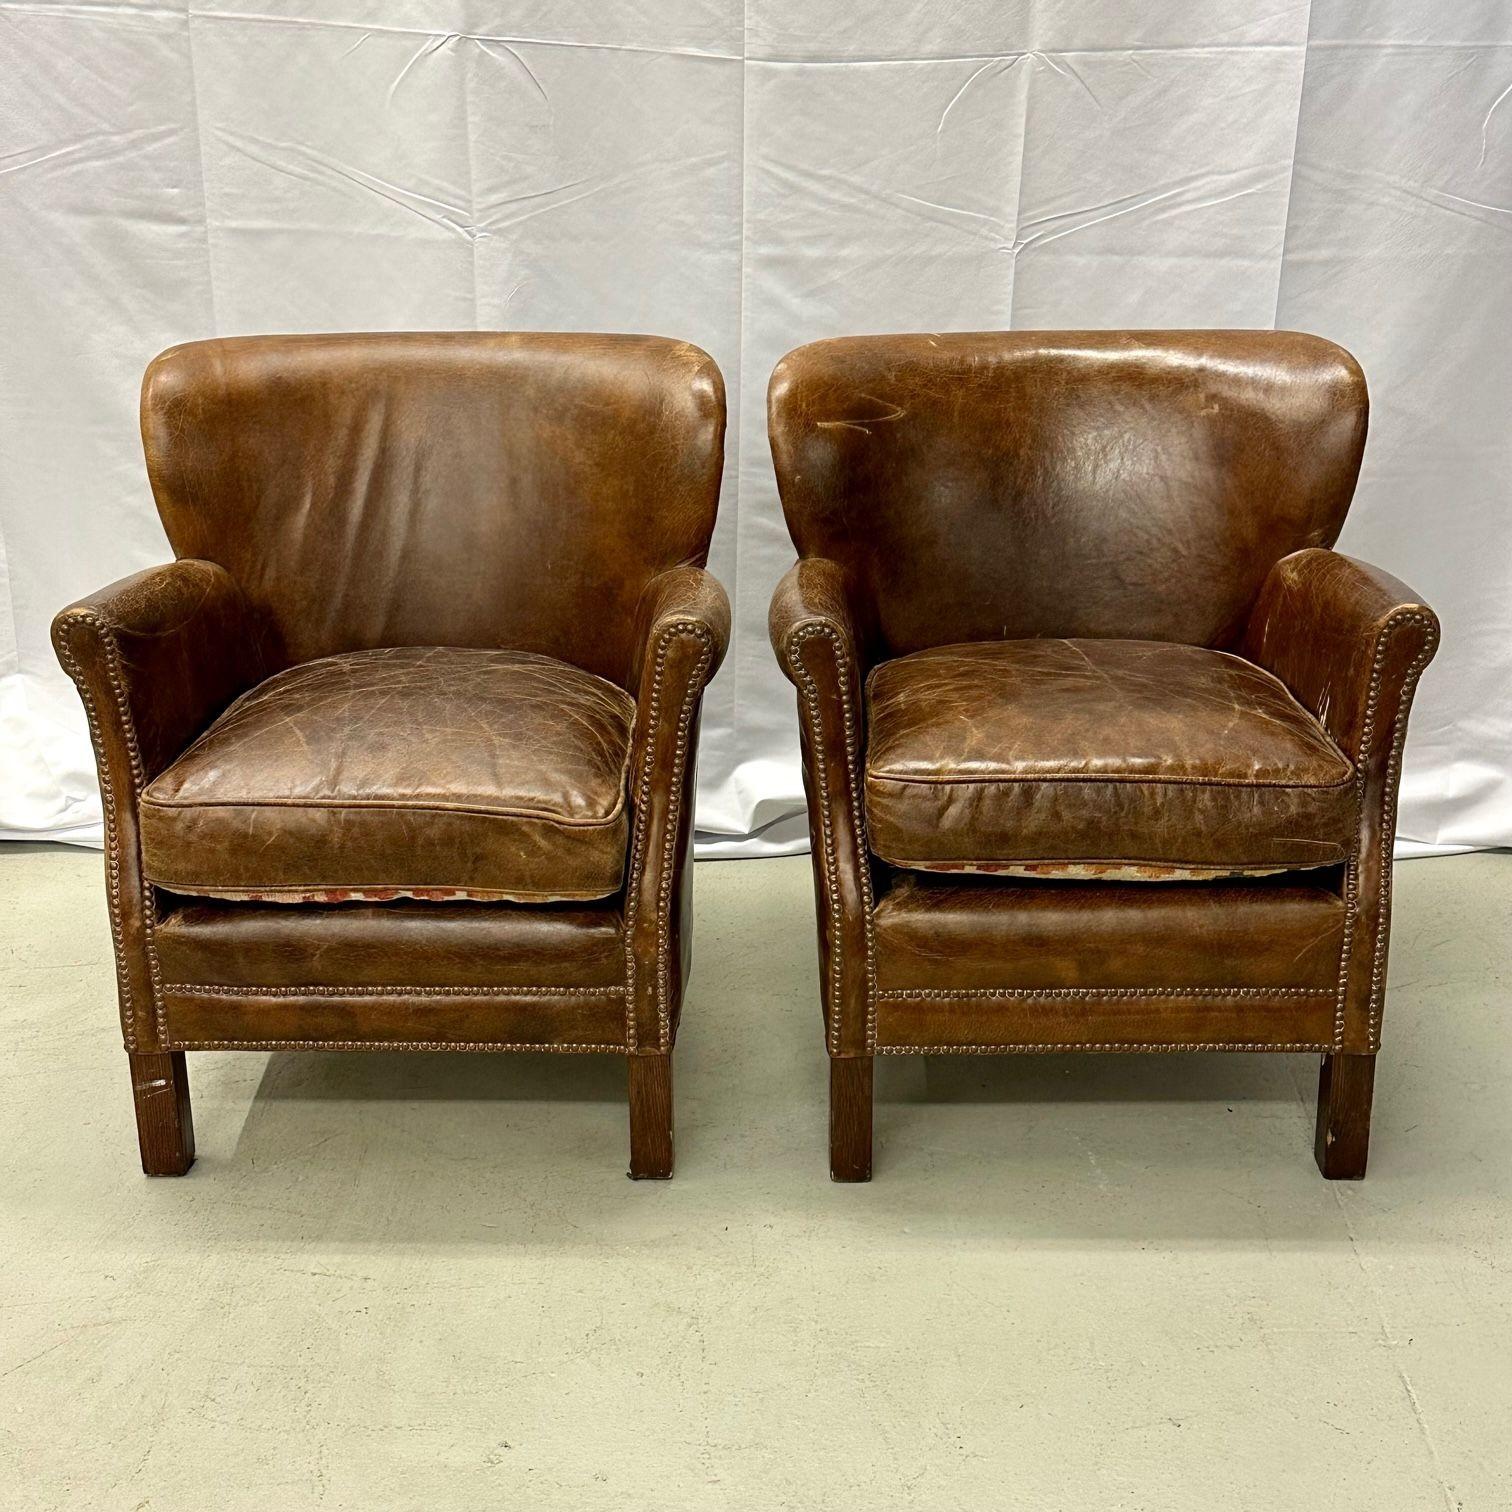 Art Deco Pair of Petite Distressed Leather Club / Lounge / Arm Chairs, Danish Style